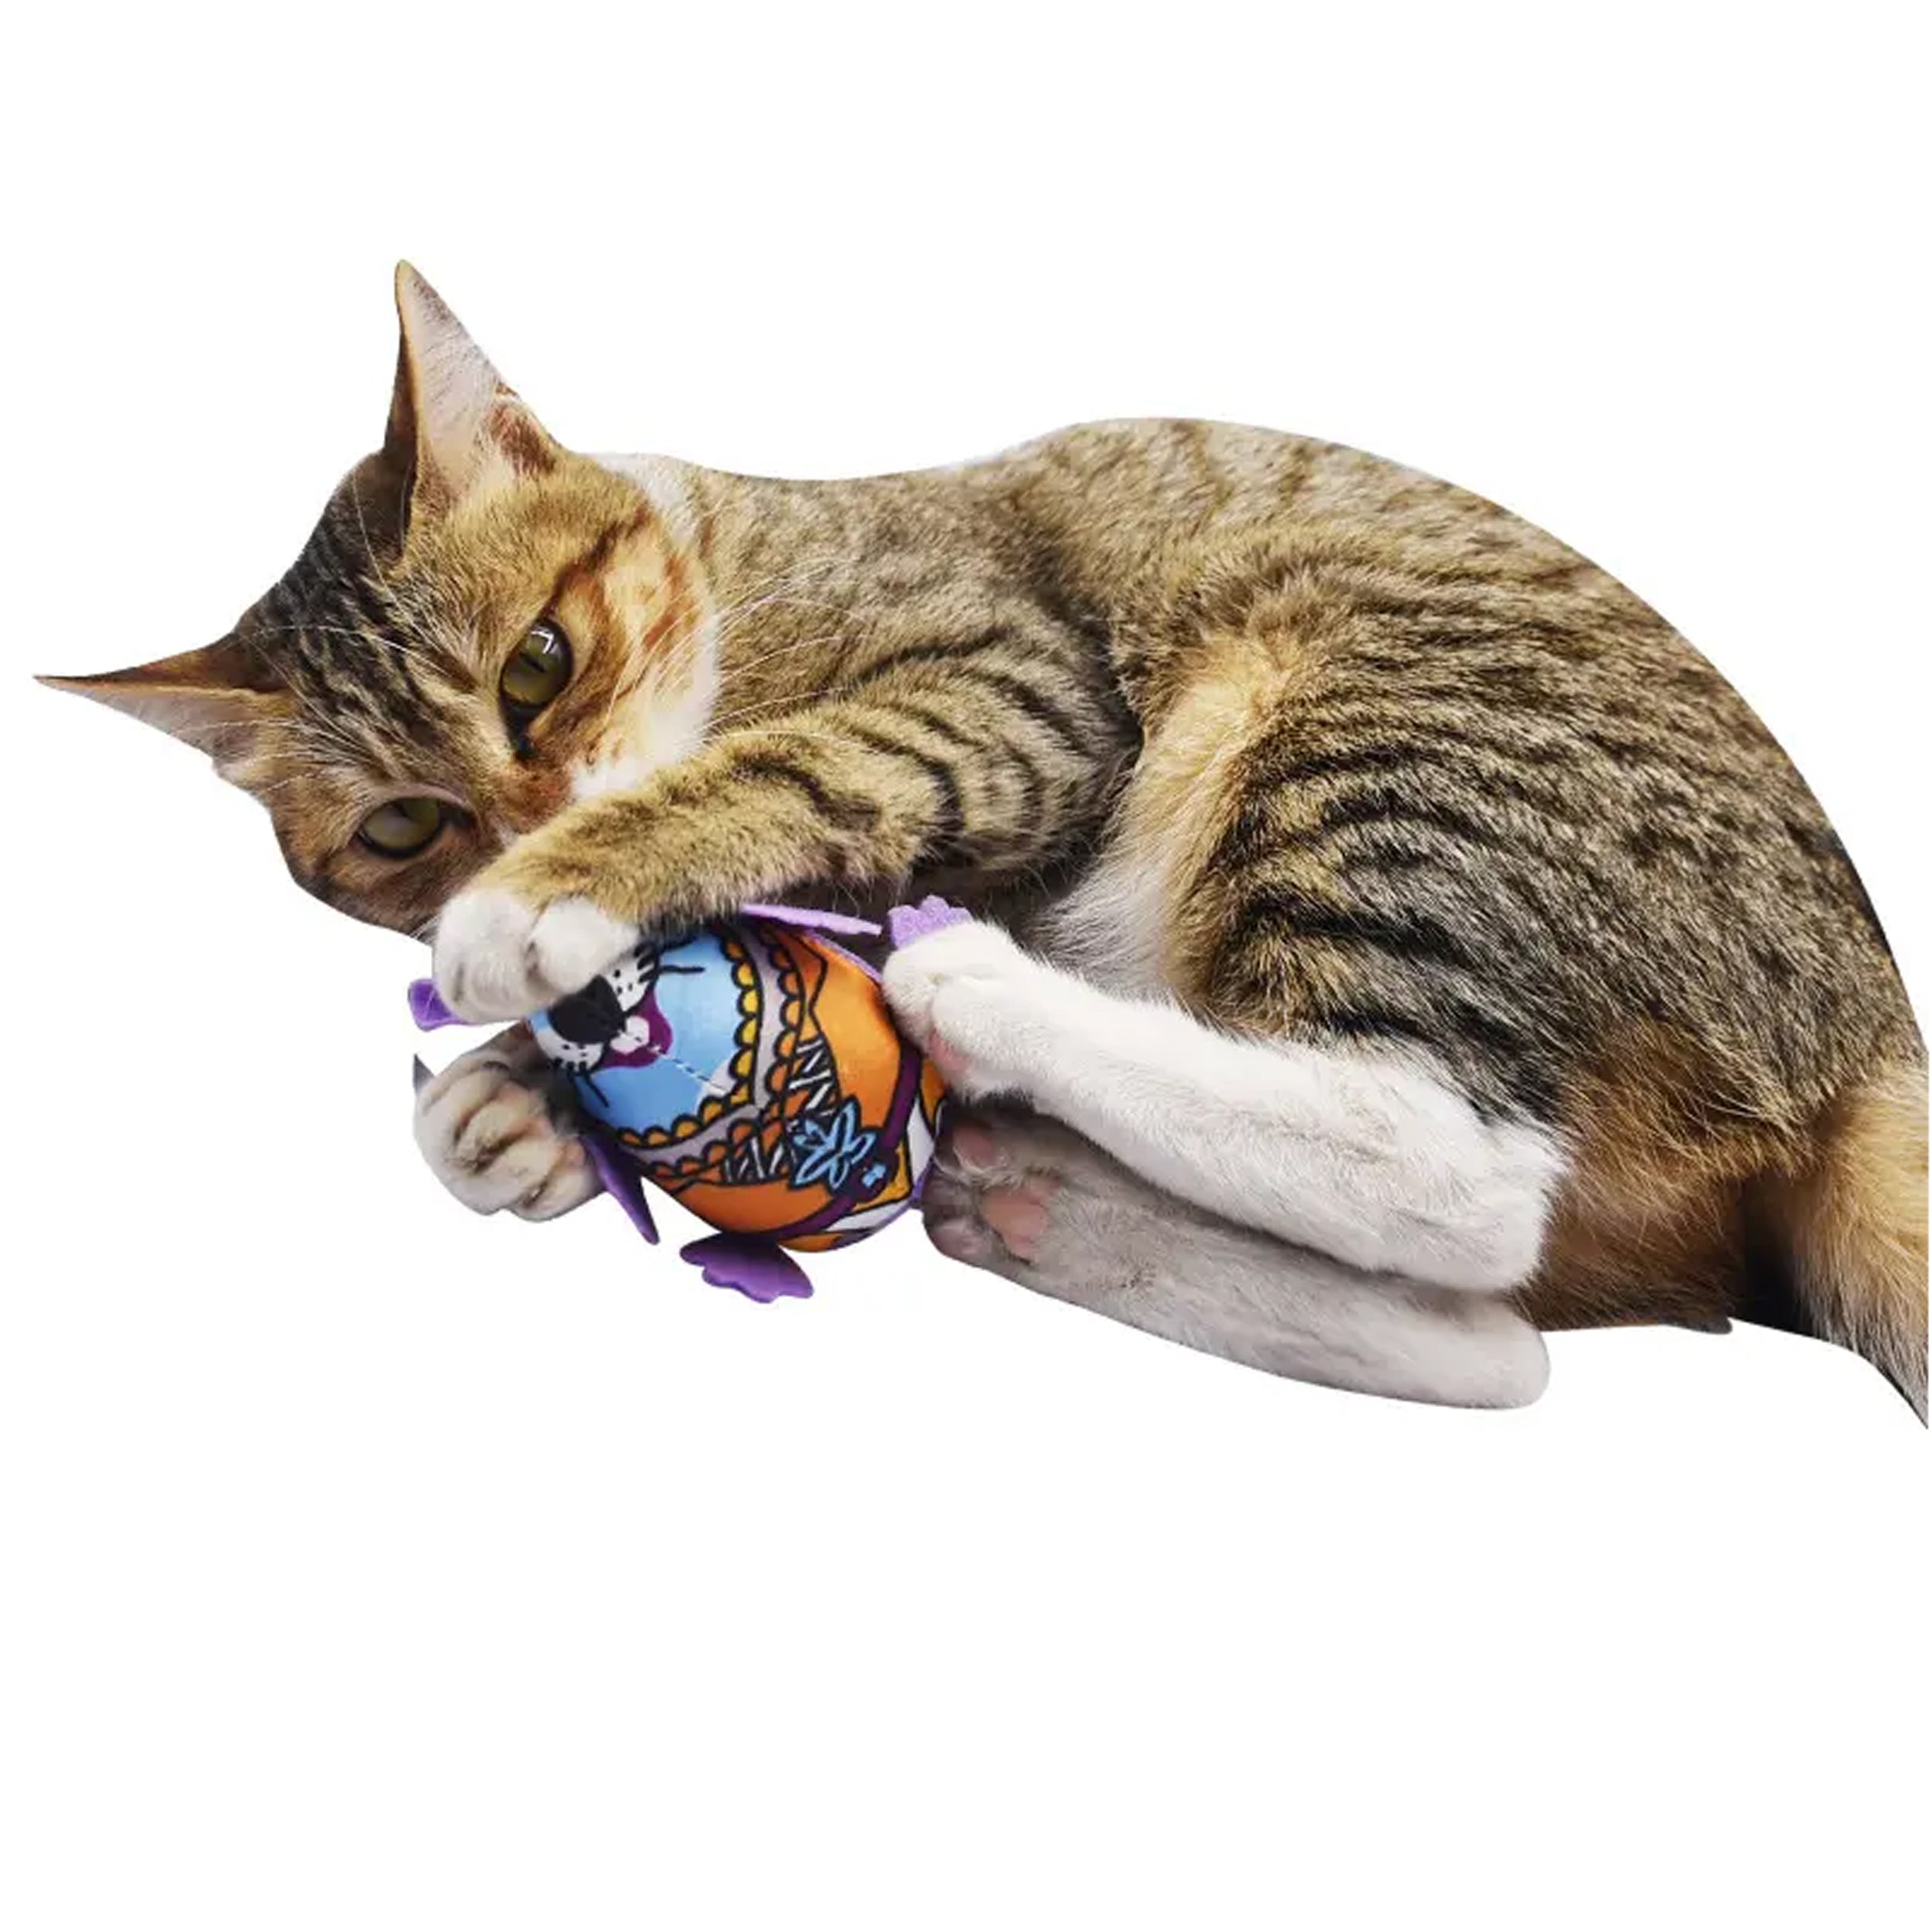 Entertain Your Feline Friend with Our Cute Plush Cat Toy Mouse - Built-In Catnip and Bell